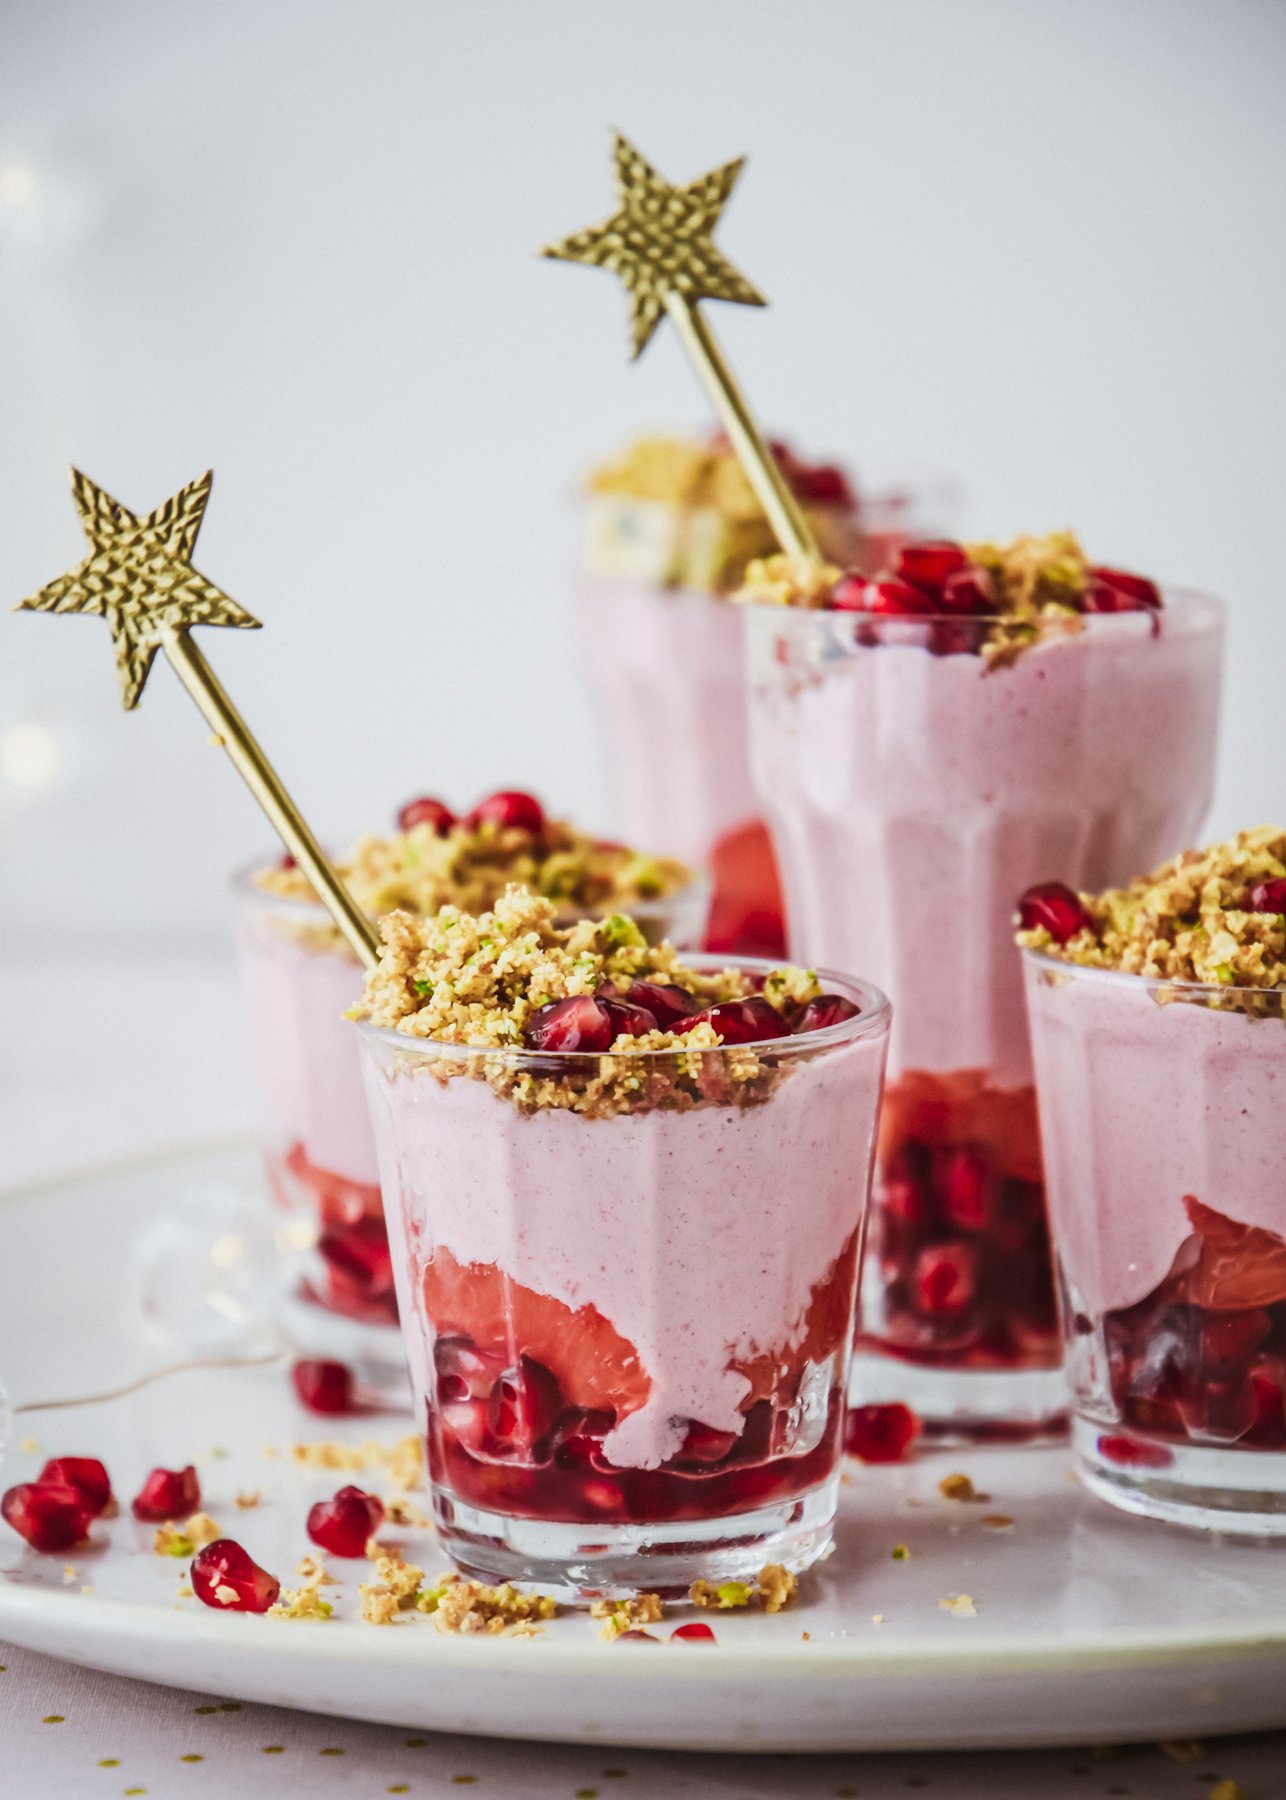 You are currently viewing Dreamy Pomegranate Cream Pots With Pink Grapefruit & Pistachio Crumble